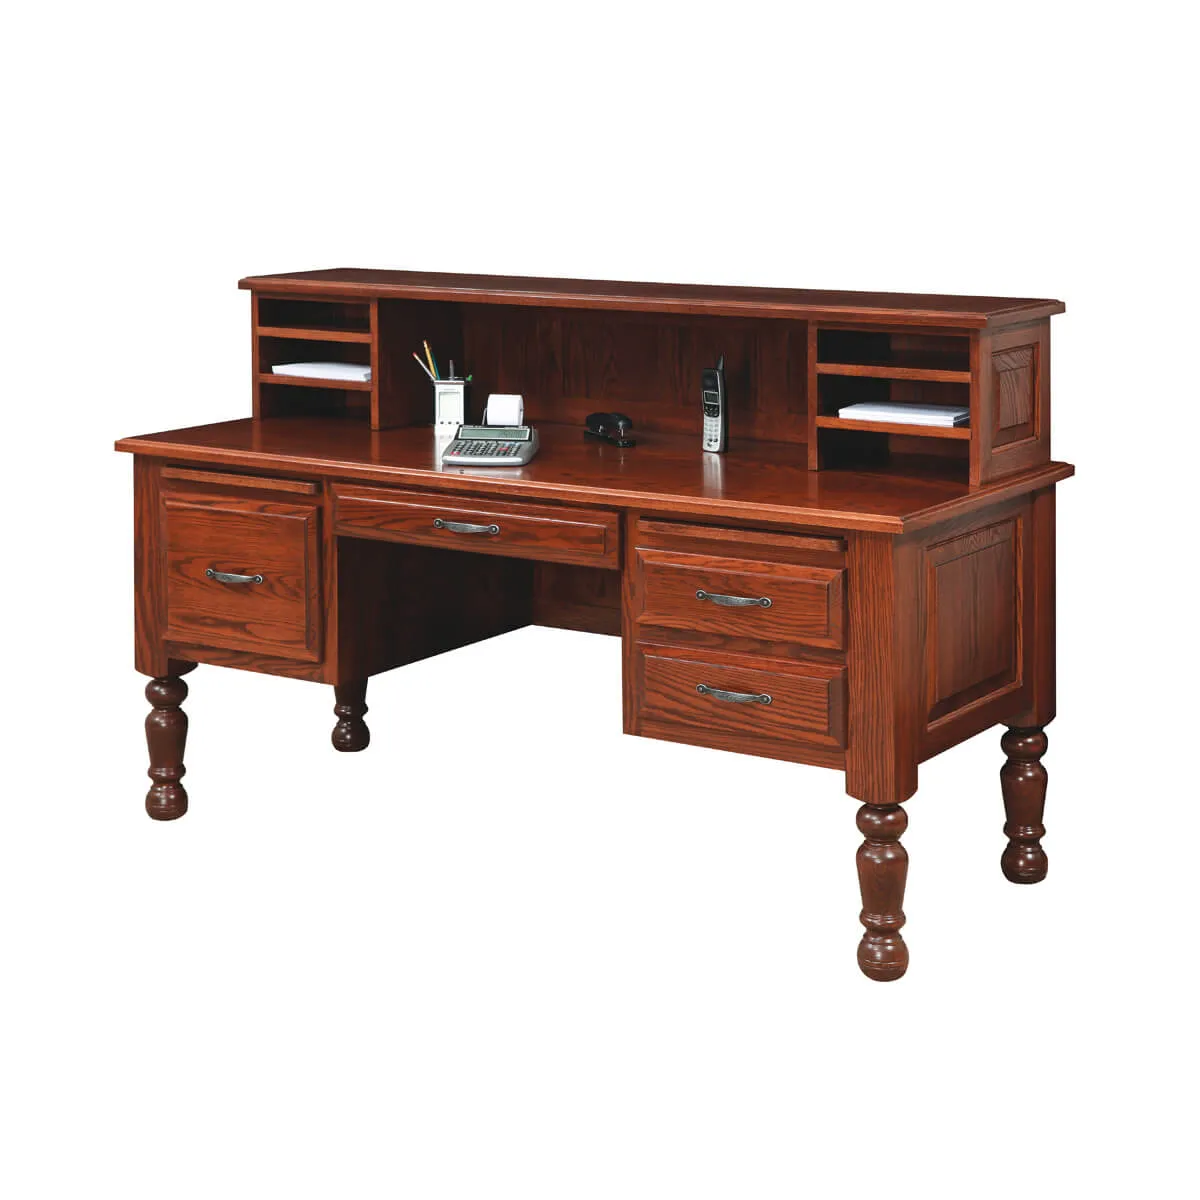 American Series Traditional Lap Top Desk with Cubby